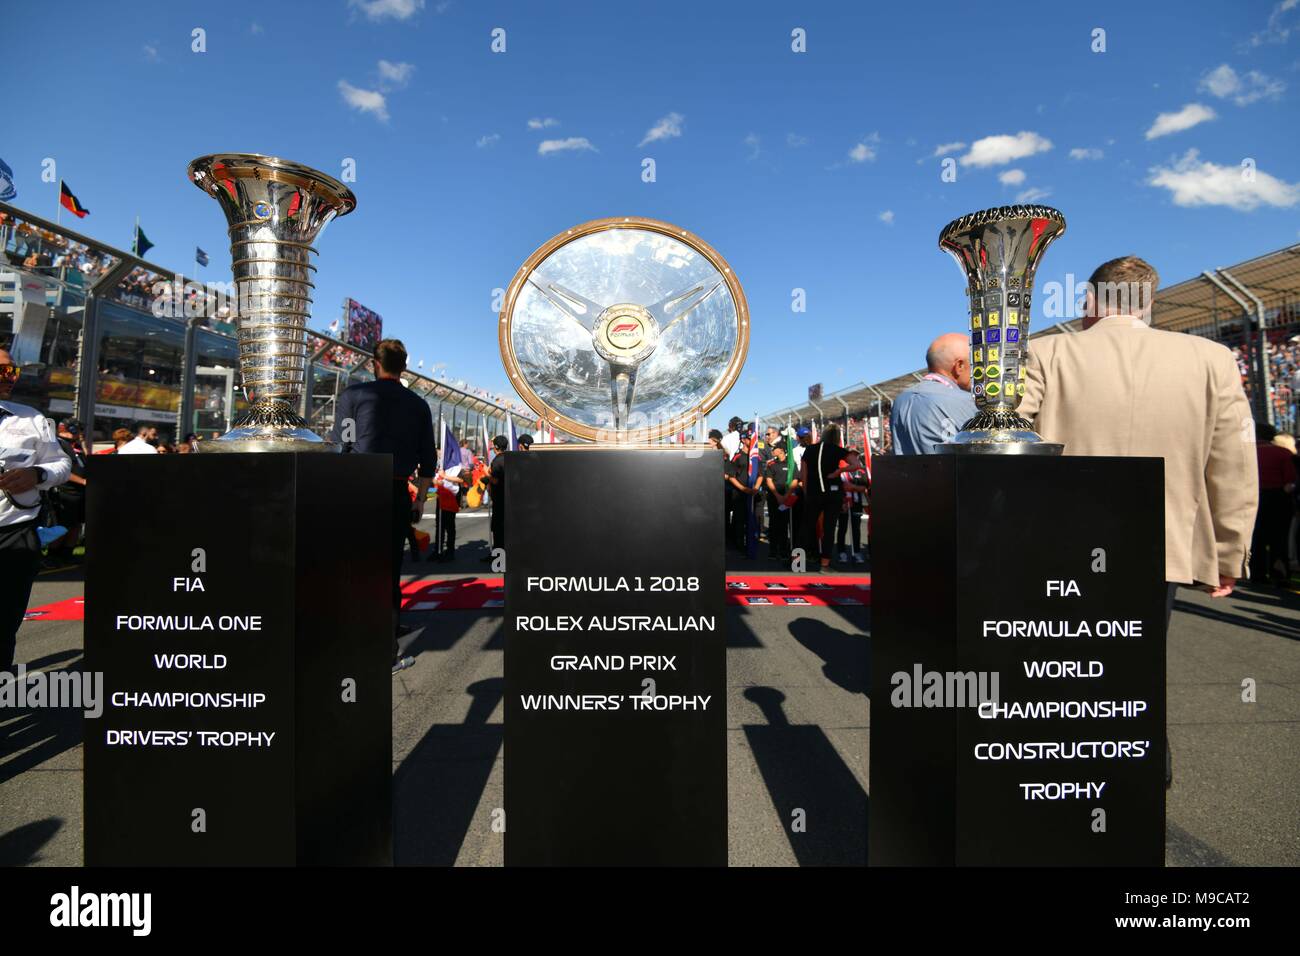 Albert Park, Melbourne, Australia. 25th Mar, 2018. The race trophies are displayed on the grid prior to the start of the 2018 Australian Formula One Grand Prix at Albert Park, Melbourne, Australia. Sydney Low/Cal Sport Media/Alamy Live News Stock Photo